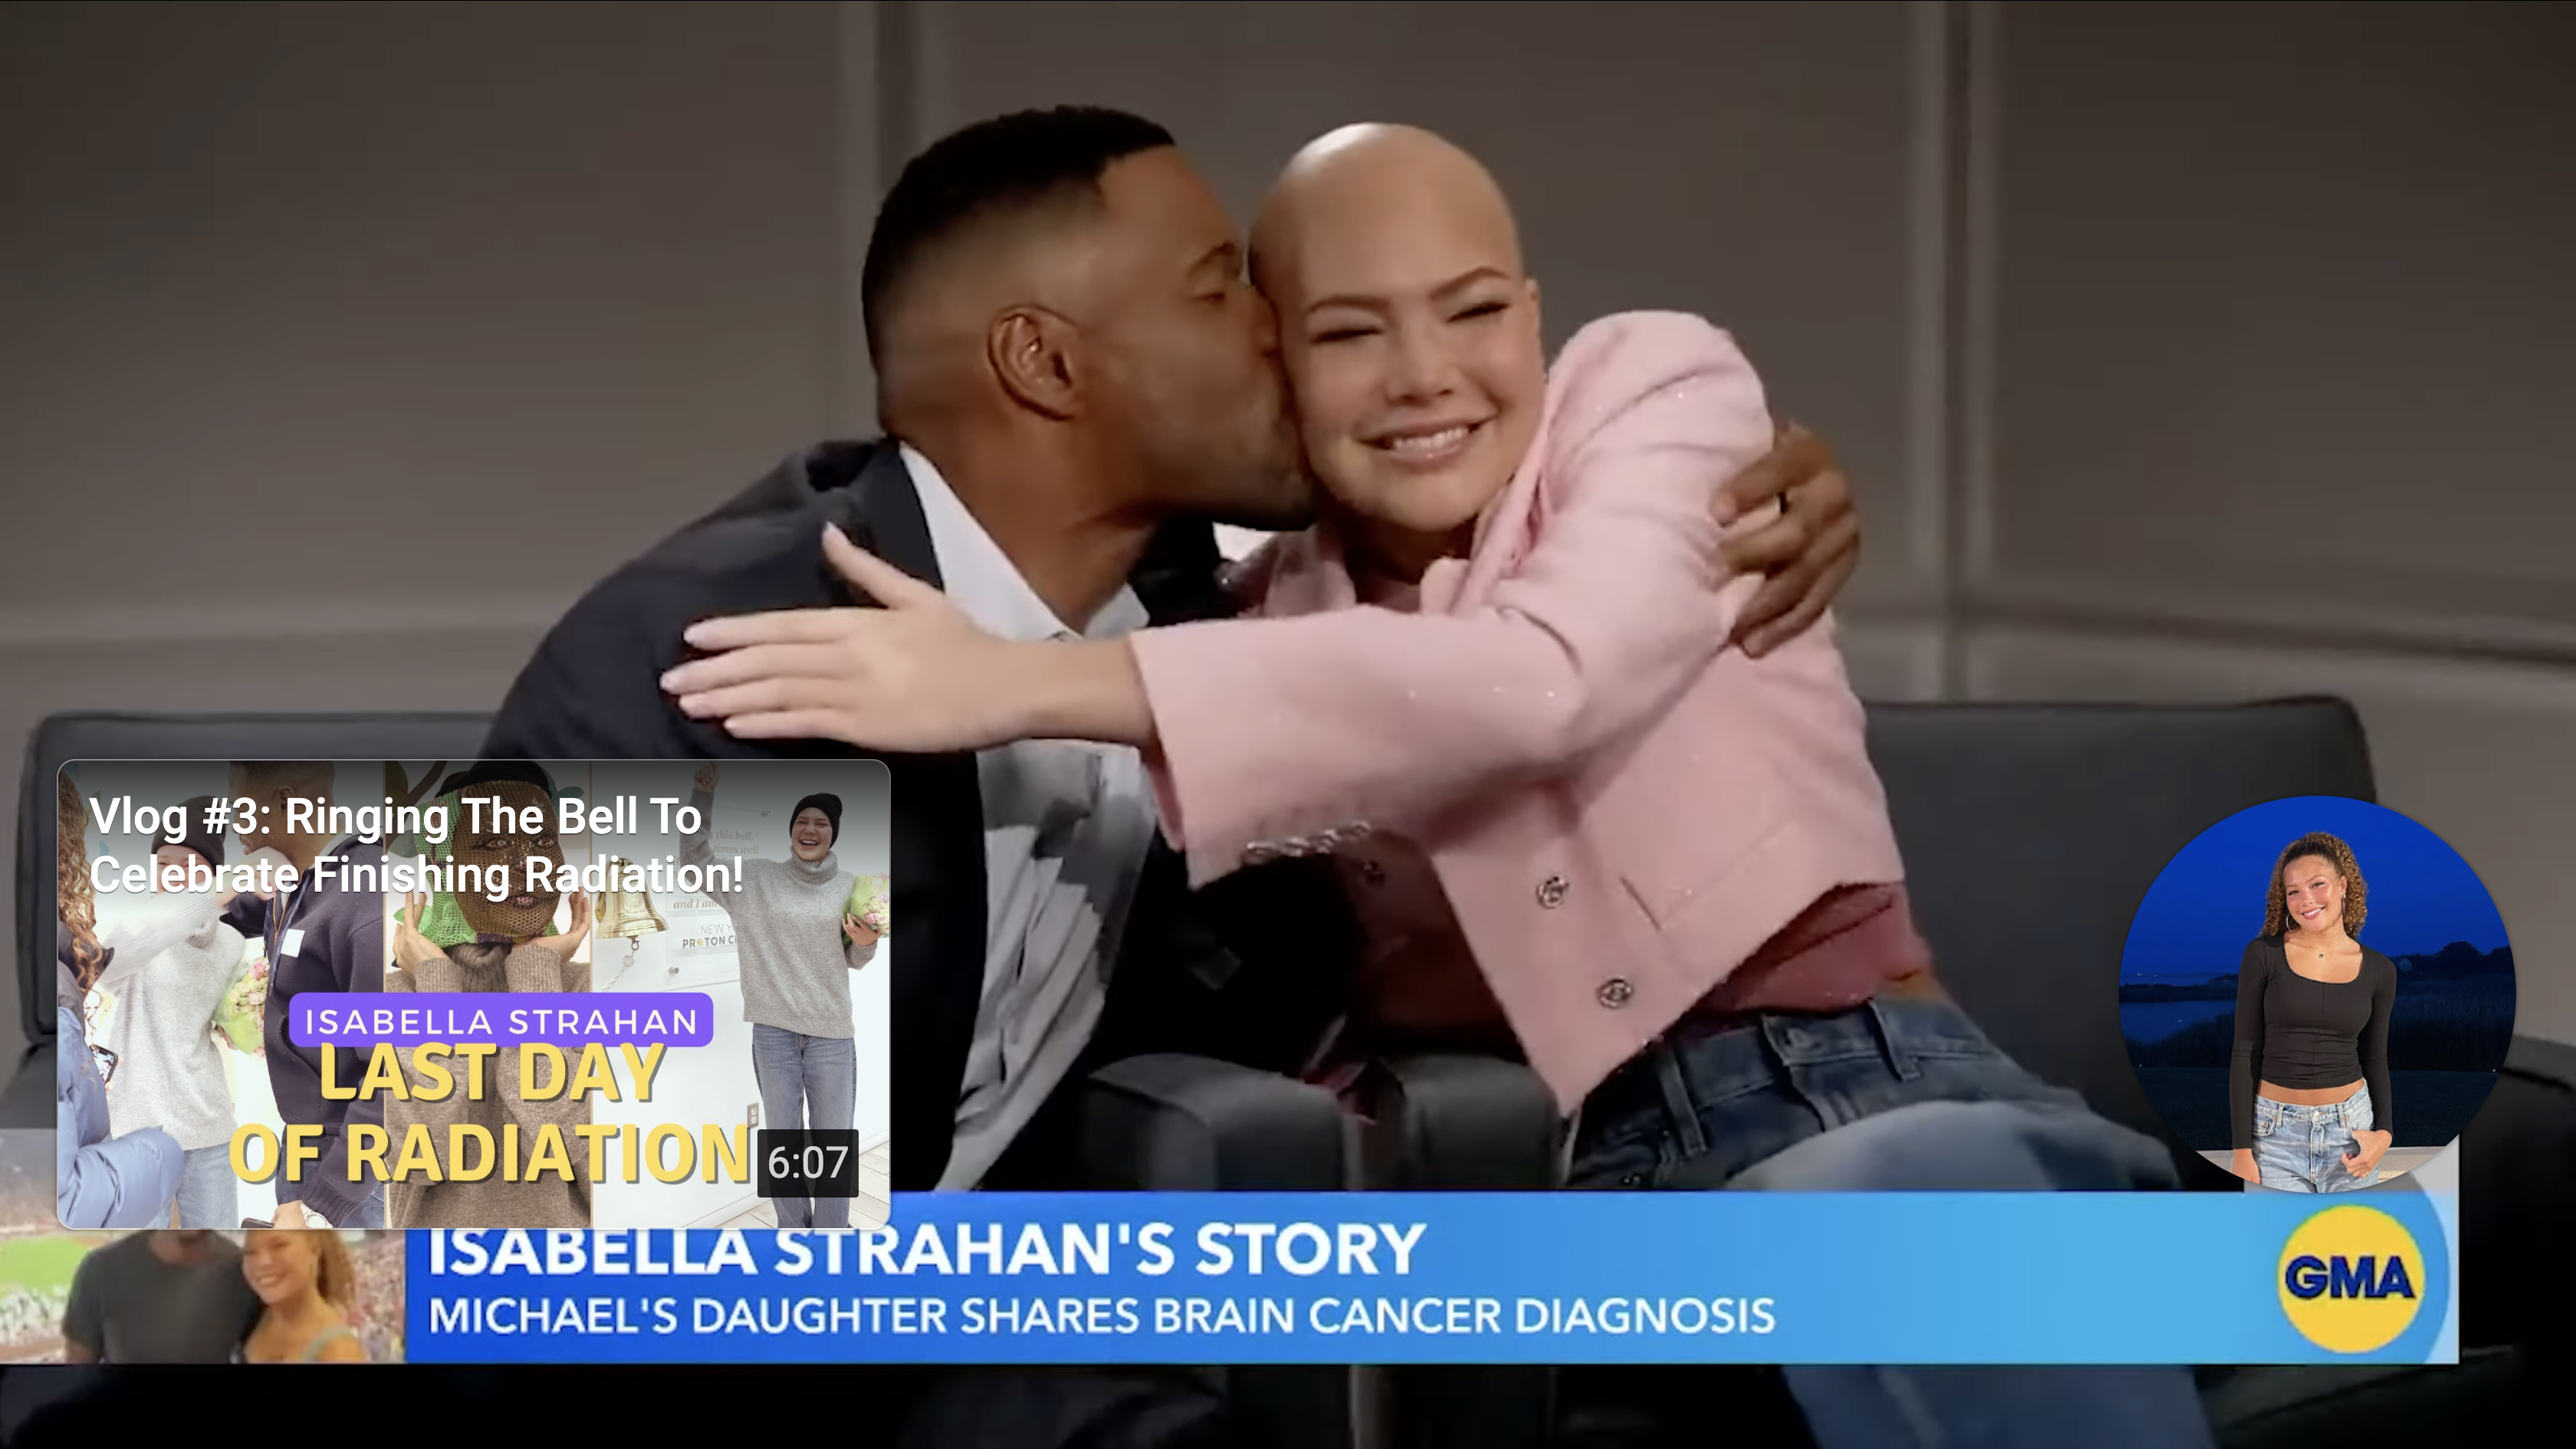 The 19-year-old has been publicly supported by her family, including her dad after she revealed her diagnosis on Good Morning America